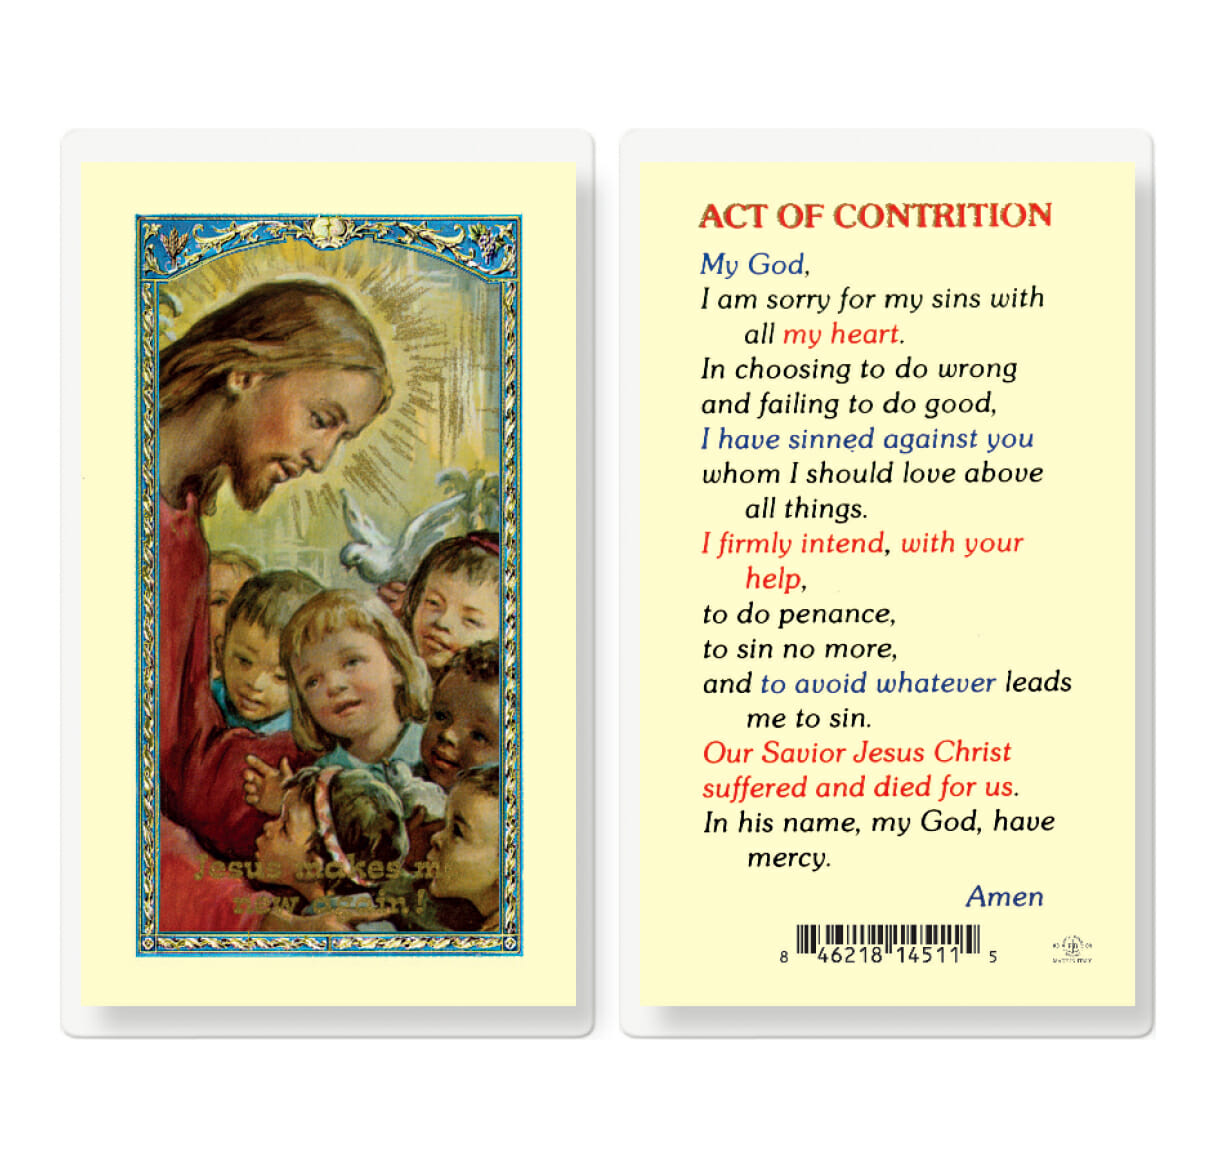 act-of-contrition-laminated-holy-card-25-pack-buy-religious-catholic-store